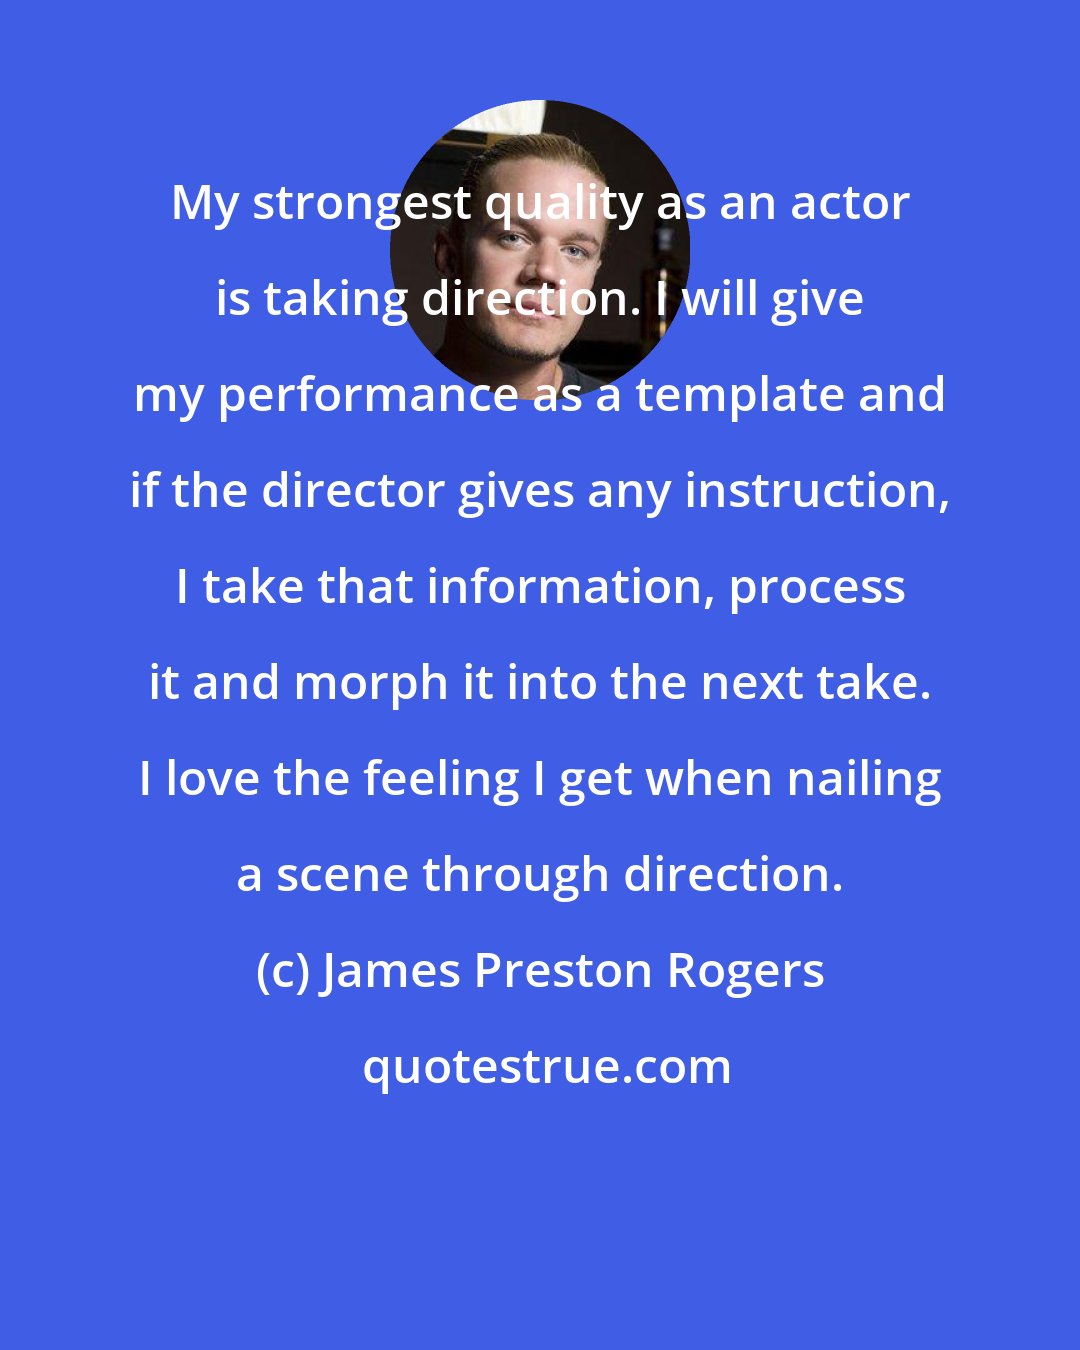 James Preston Rogers: My strongest quality as an actor is taking direction. I will give my performance as a template and if the director gives any instruction, I take that information, process it and morph it into the next take. I love the feeling I get when nailing a scene through direction.